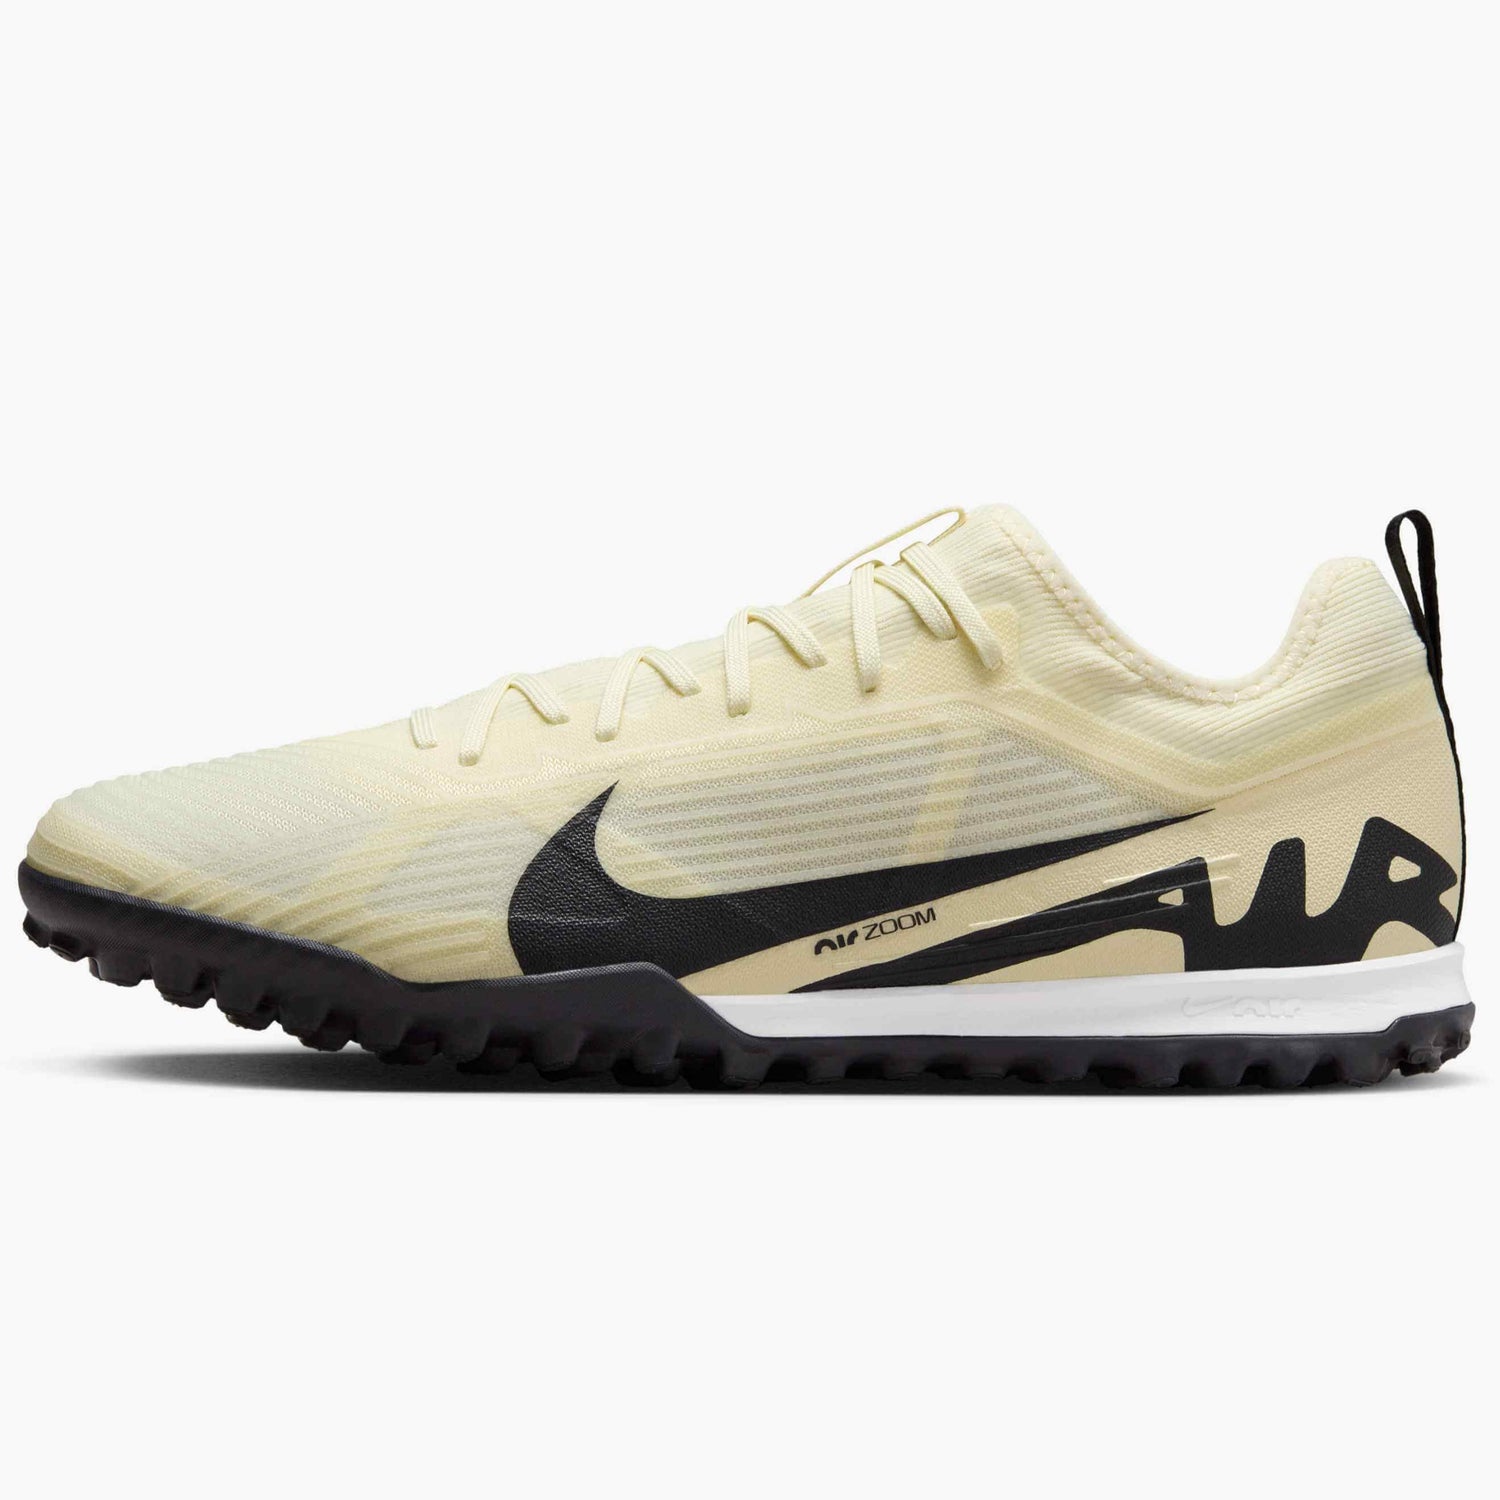 Nike Zoom Vapor 15 Pro Turf - Mad Ready Pack (SP24) (Side 1)